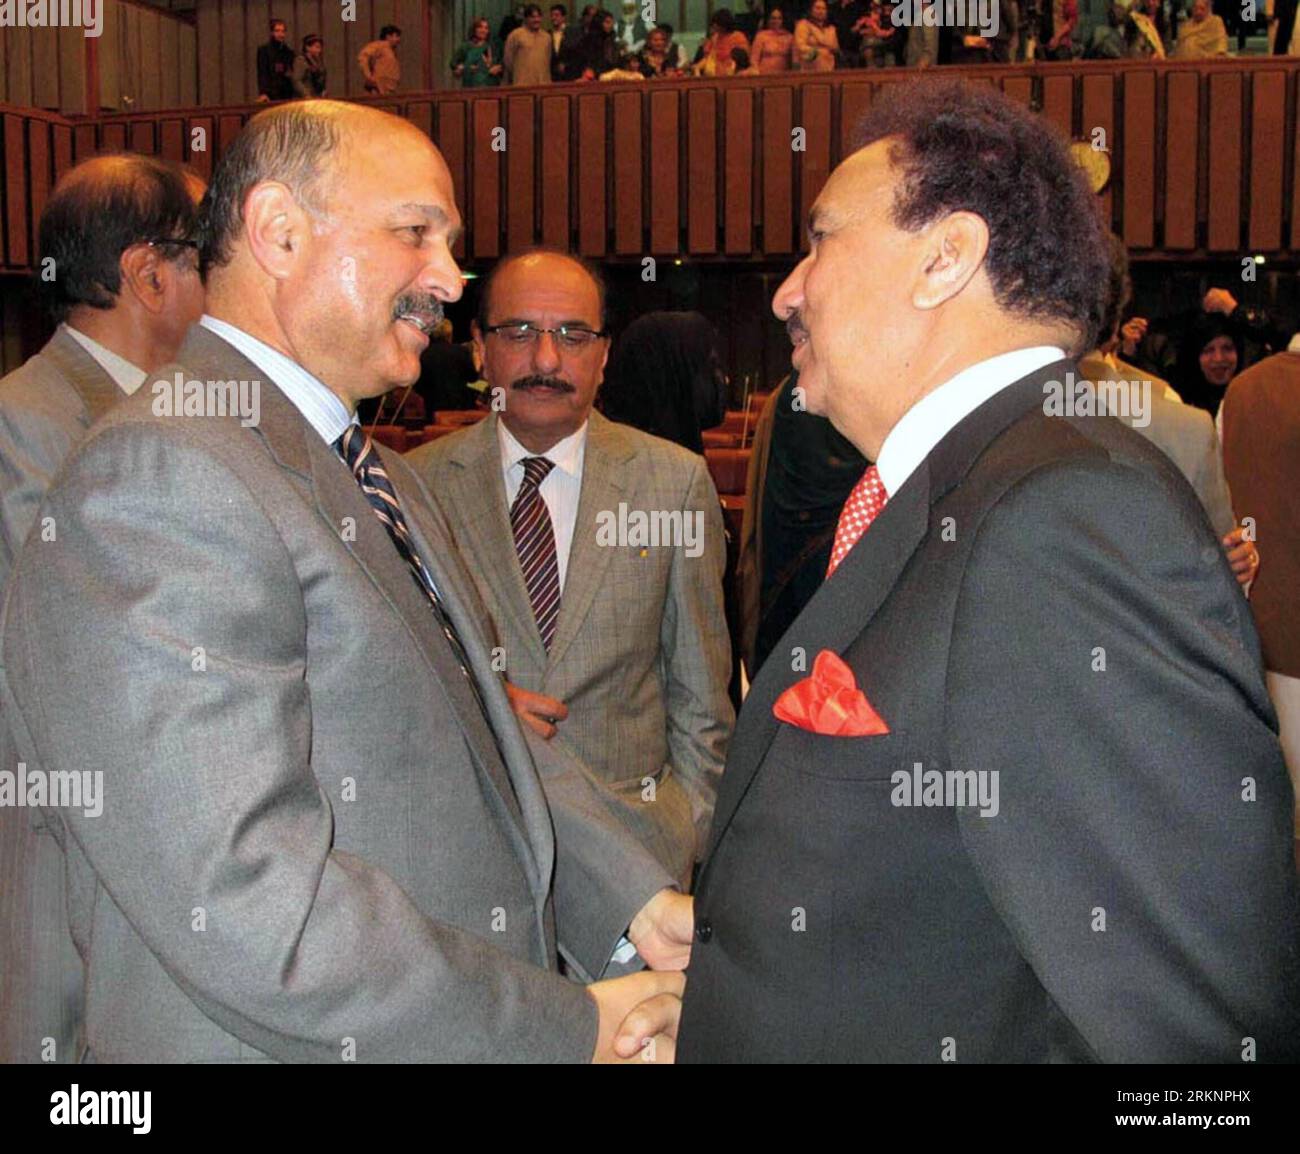 Bildnummer: 57382751  Datum: 12.03.2012  Copyright: imago/Xinhua (120313) -- ISLAMABAD, March 13, 2012 (Xinhua) -- Pakistani Interior Minister Rehman Malik (R) arrives during the oath taking ceremony of newly elected senators in Islamabad, capital of Pakistan on March 12, 2012. A total of 54 newly elected Pakistani senators took oath on Monday, completing election of the 104-member Upper House of the parliament, enabling the ruling Pakistan Peoples Party (PPP) of President Asif Ali Zardari to further consolidate position in the House. (Xinhua/Ahmad Kamal)(axy) PAKISTAN-ISLAMABAD-NEWLY ELECTED Stock Photo